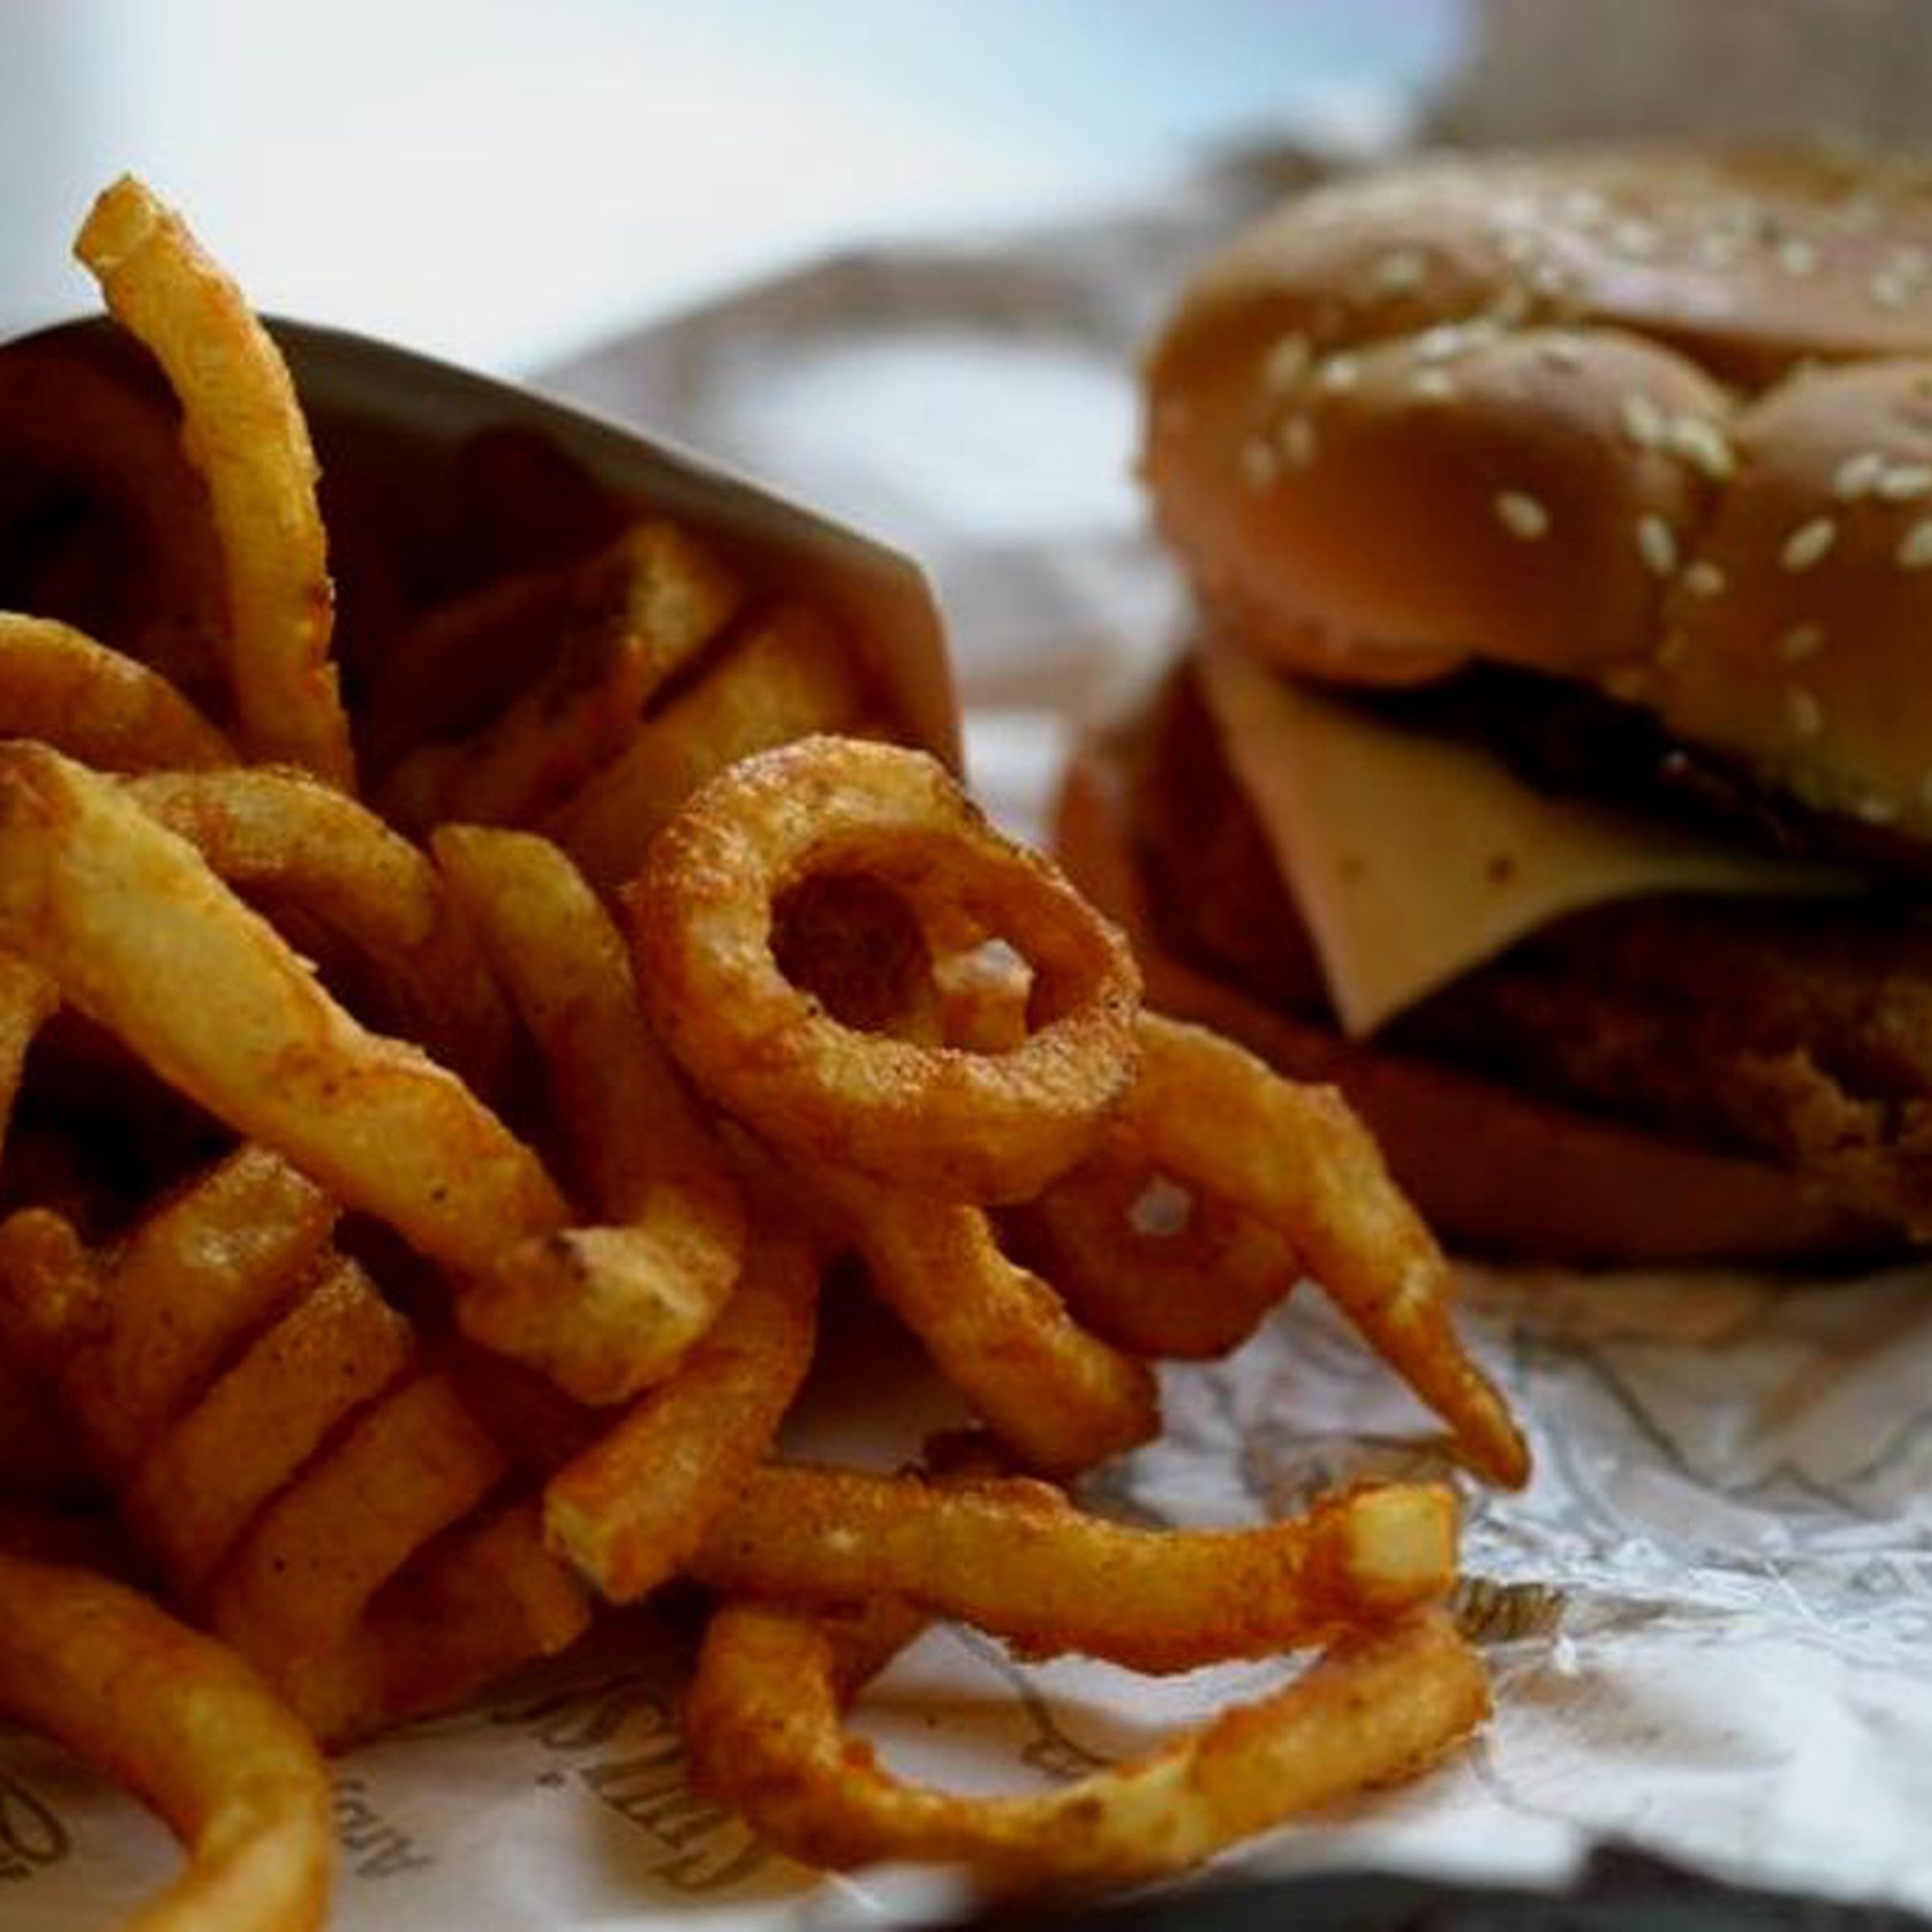 Burger and curly fries